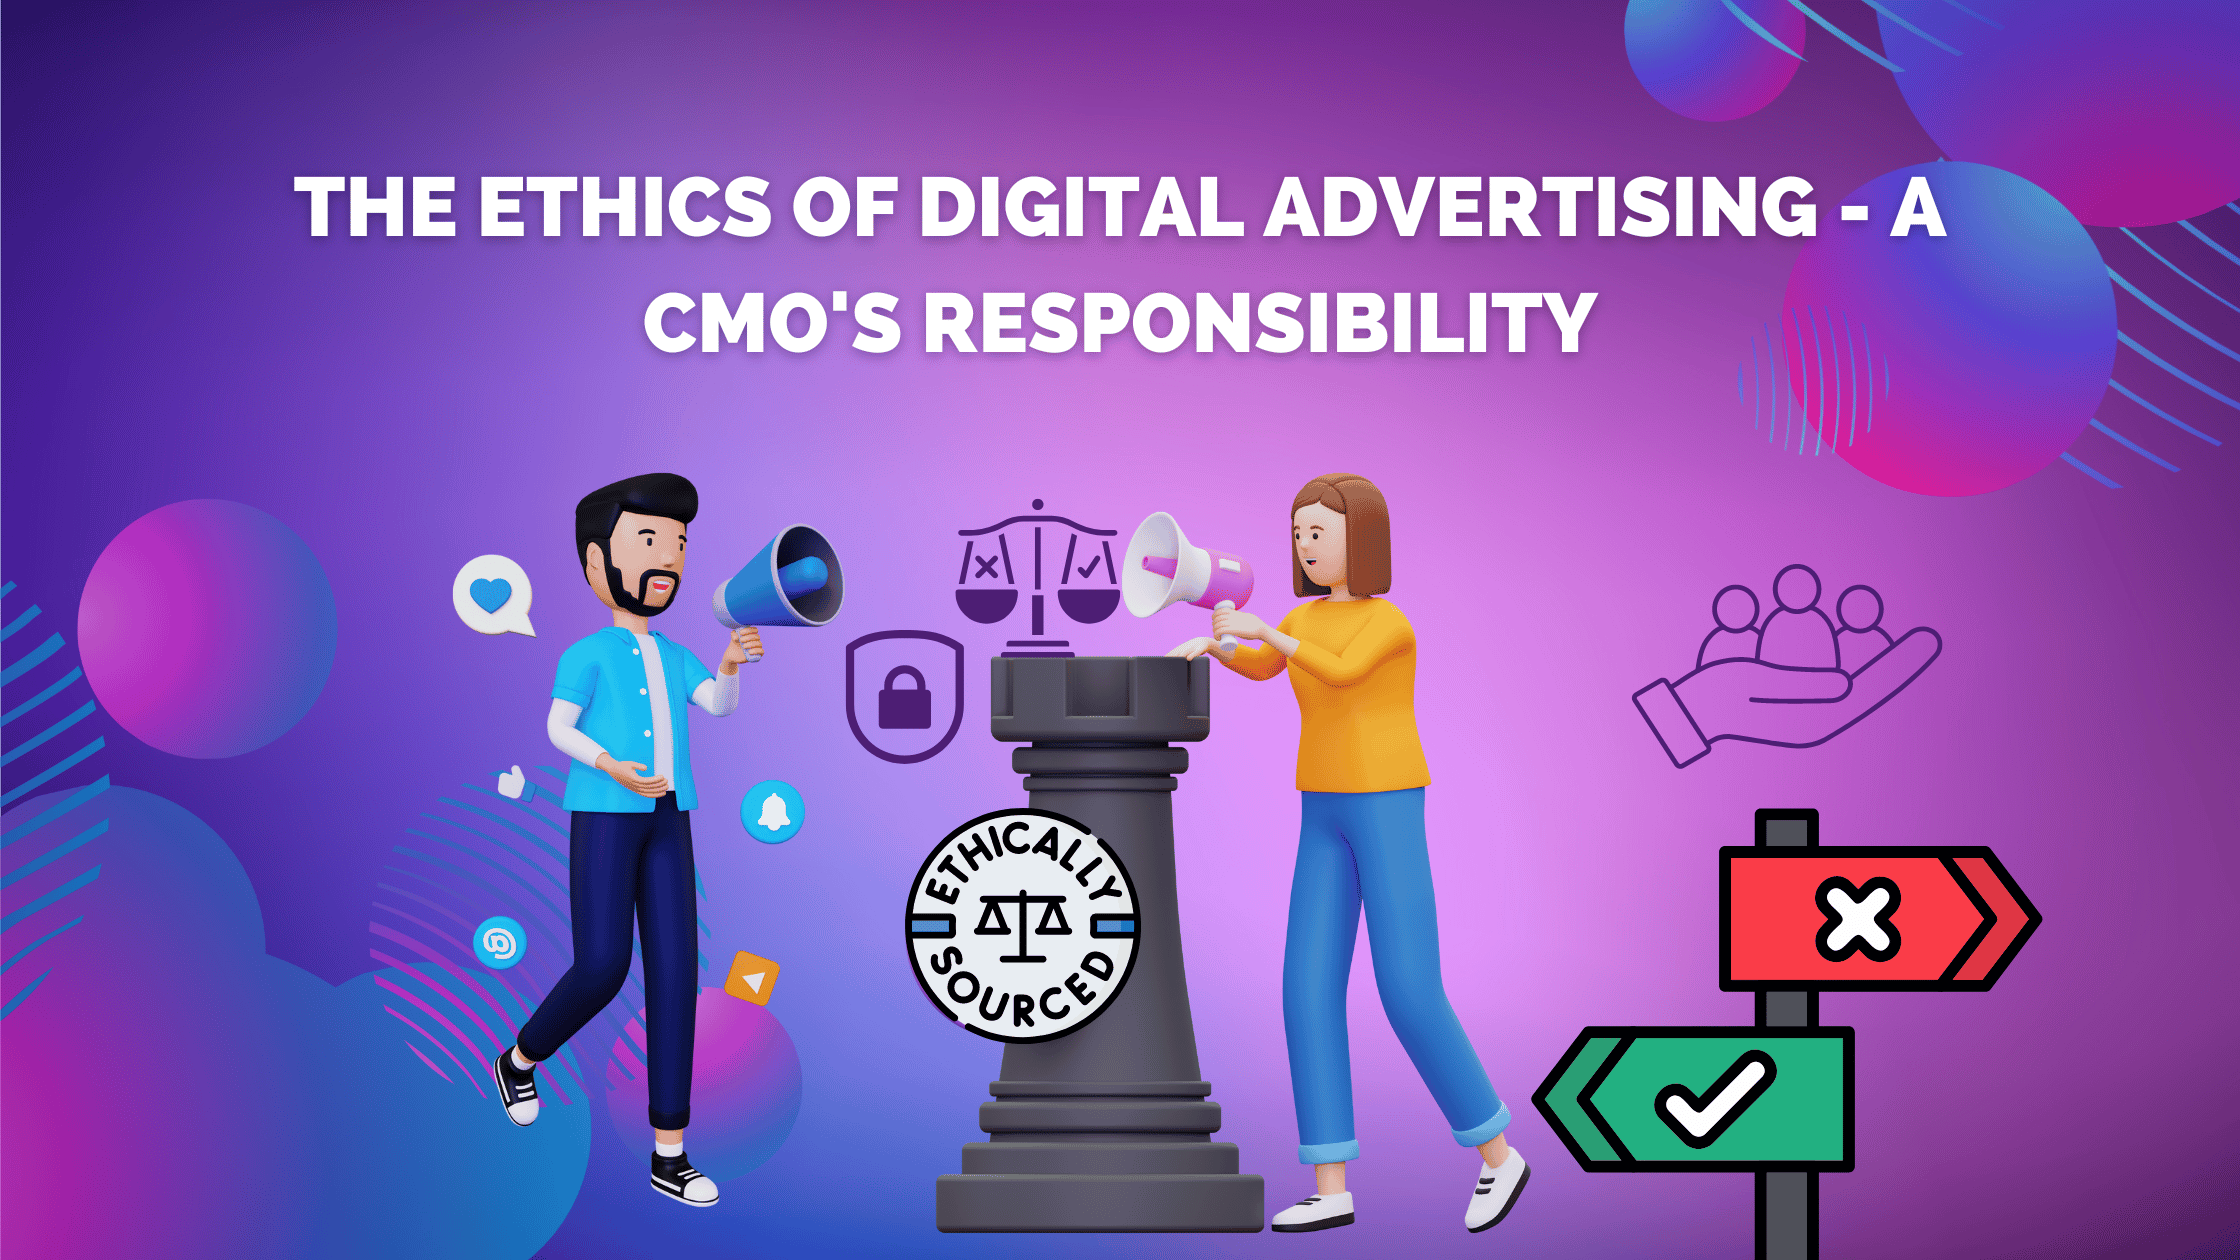 The Ethics of Digital Advertising - A CMO's Responsibility